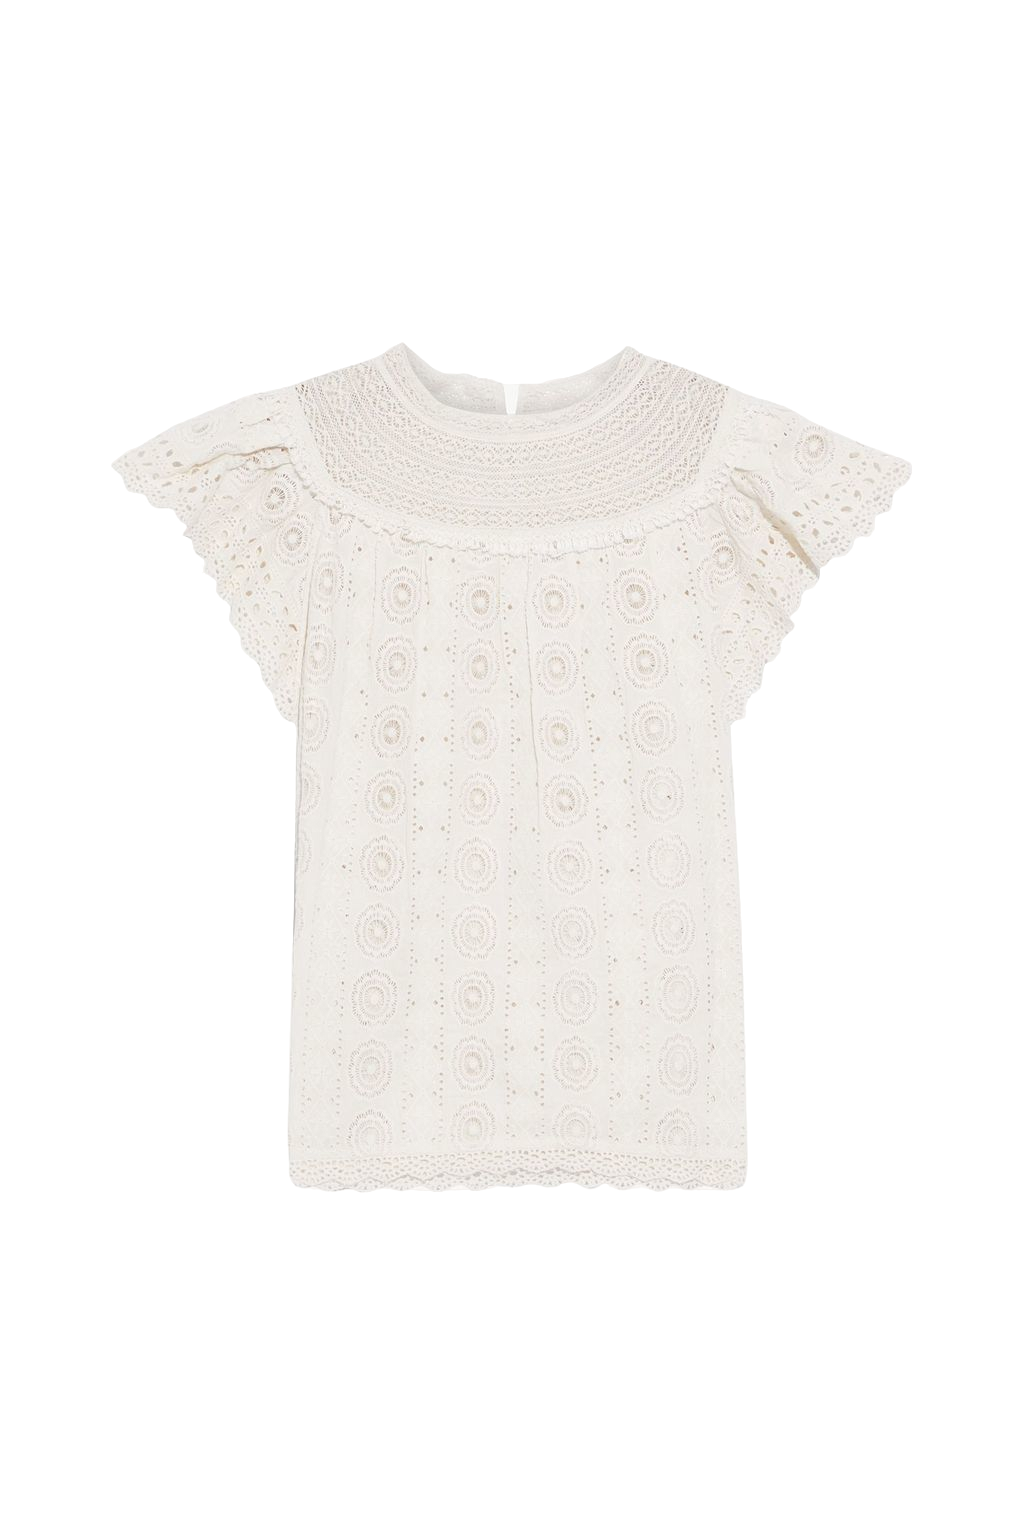 Ulla Johnson Cream Crocheted Lace-trimmed Broderie Anglaise Cotton Top BNWT UK 10